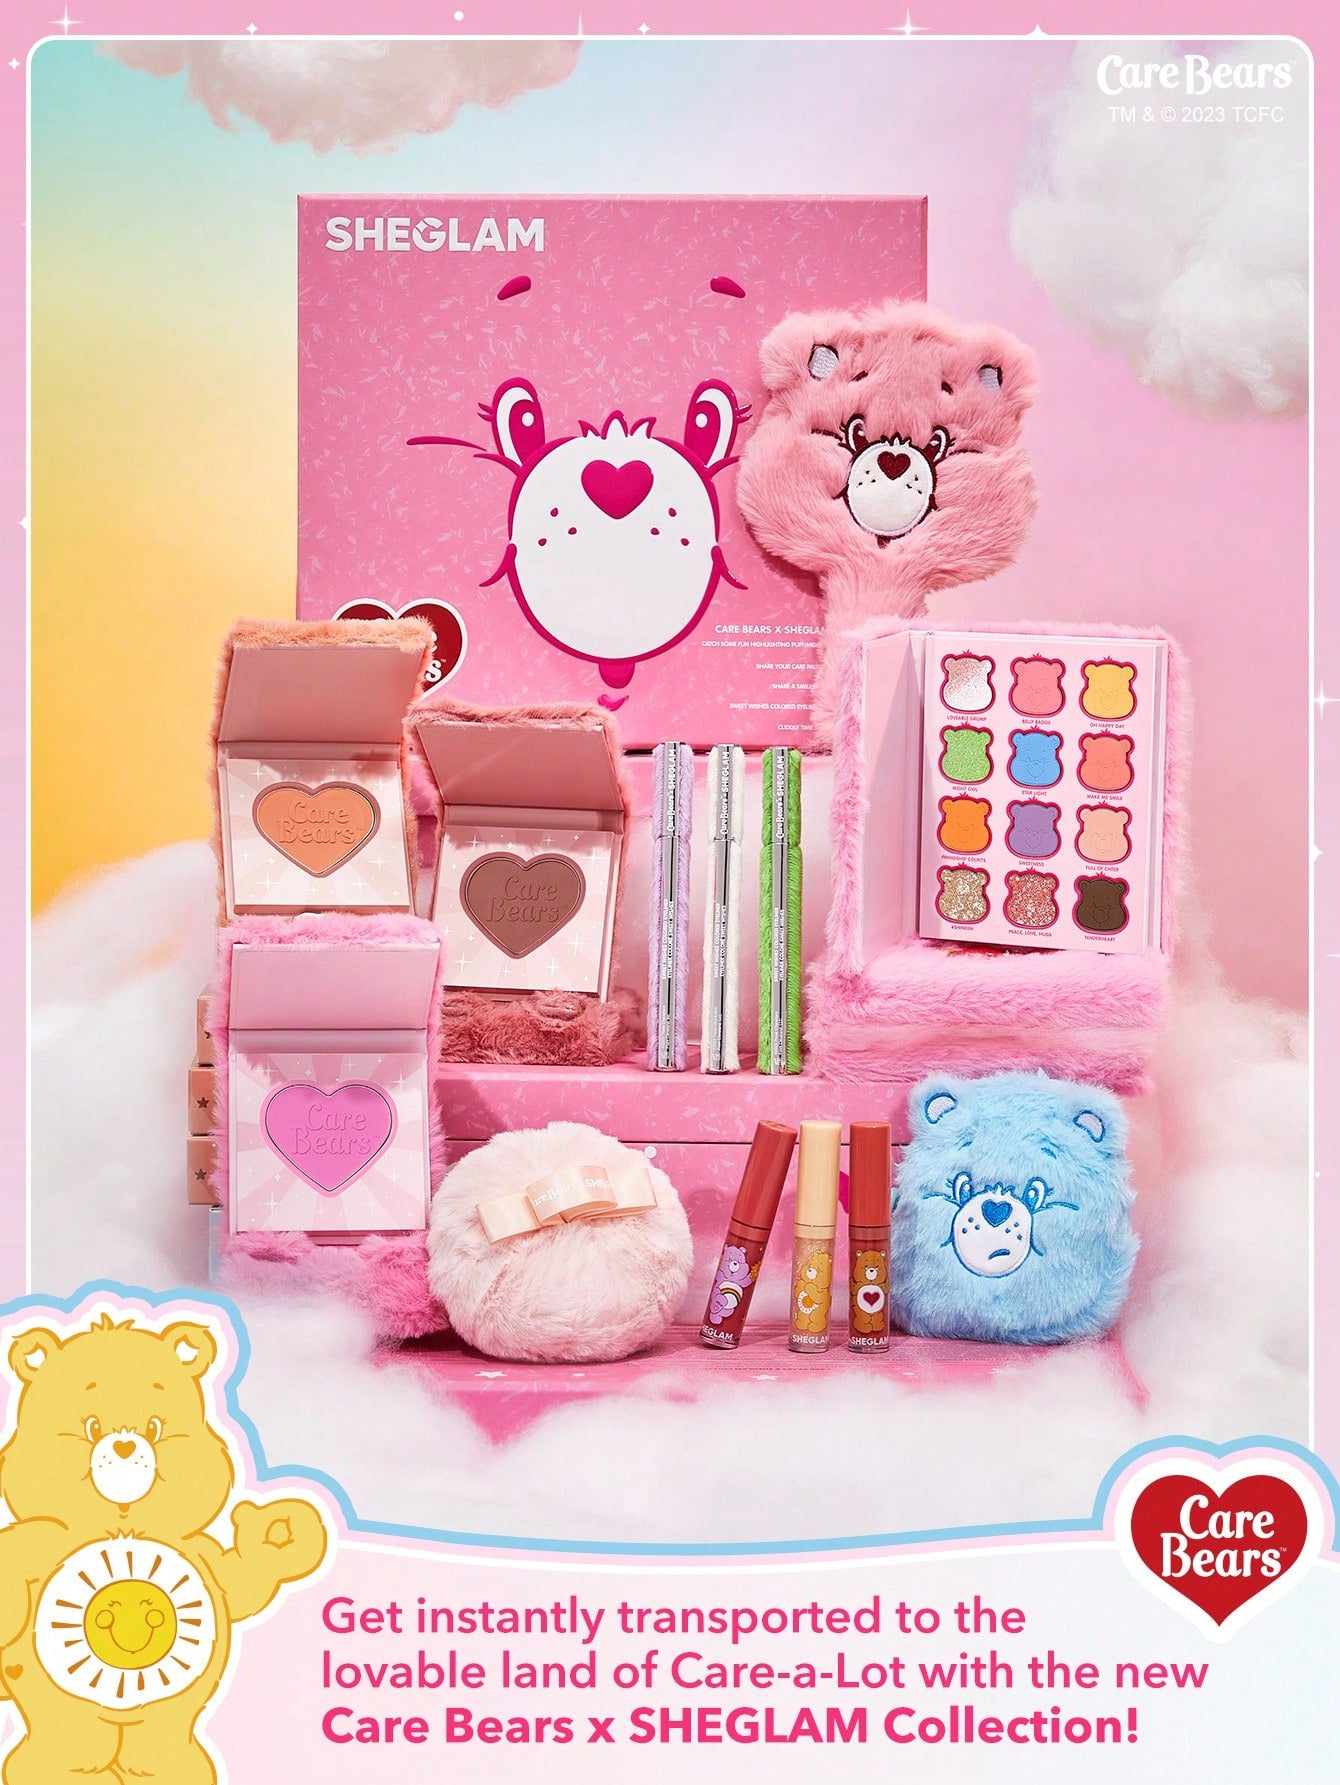 X Care Bears Cuddle Time Blush-Tickled Pink